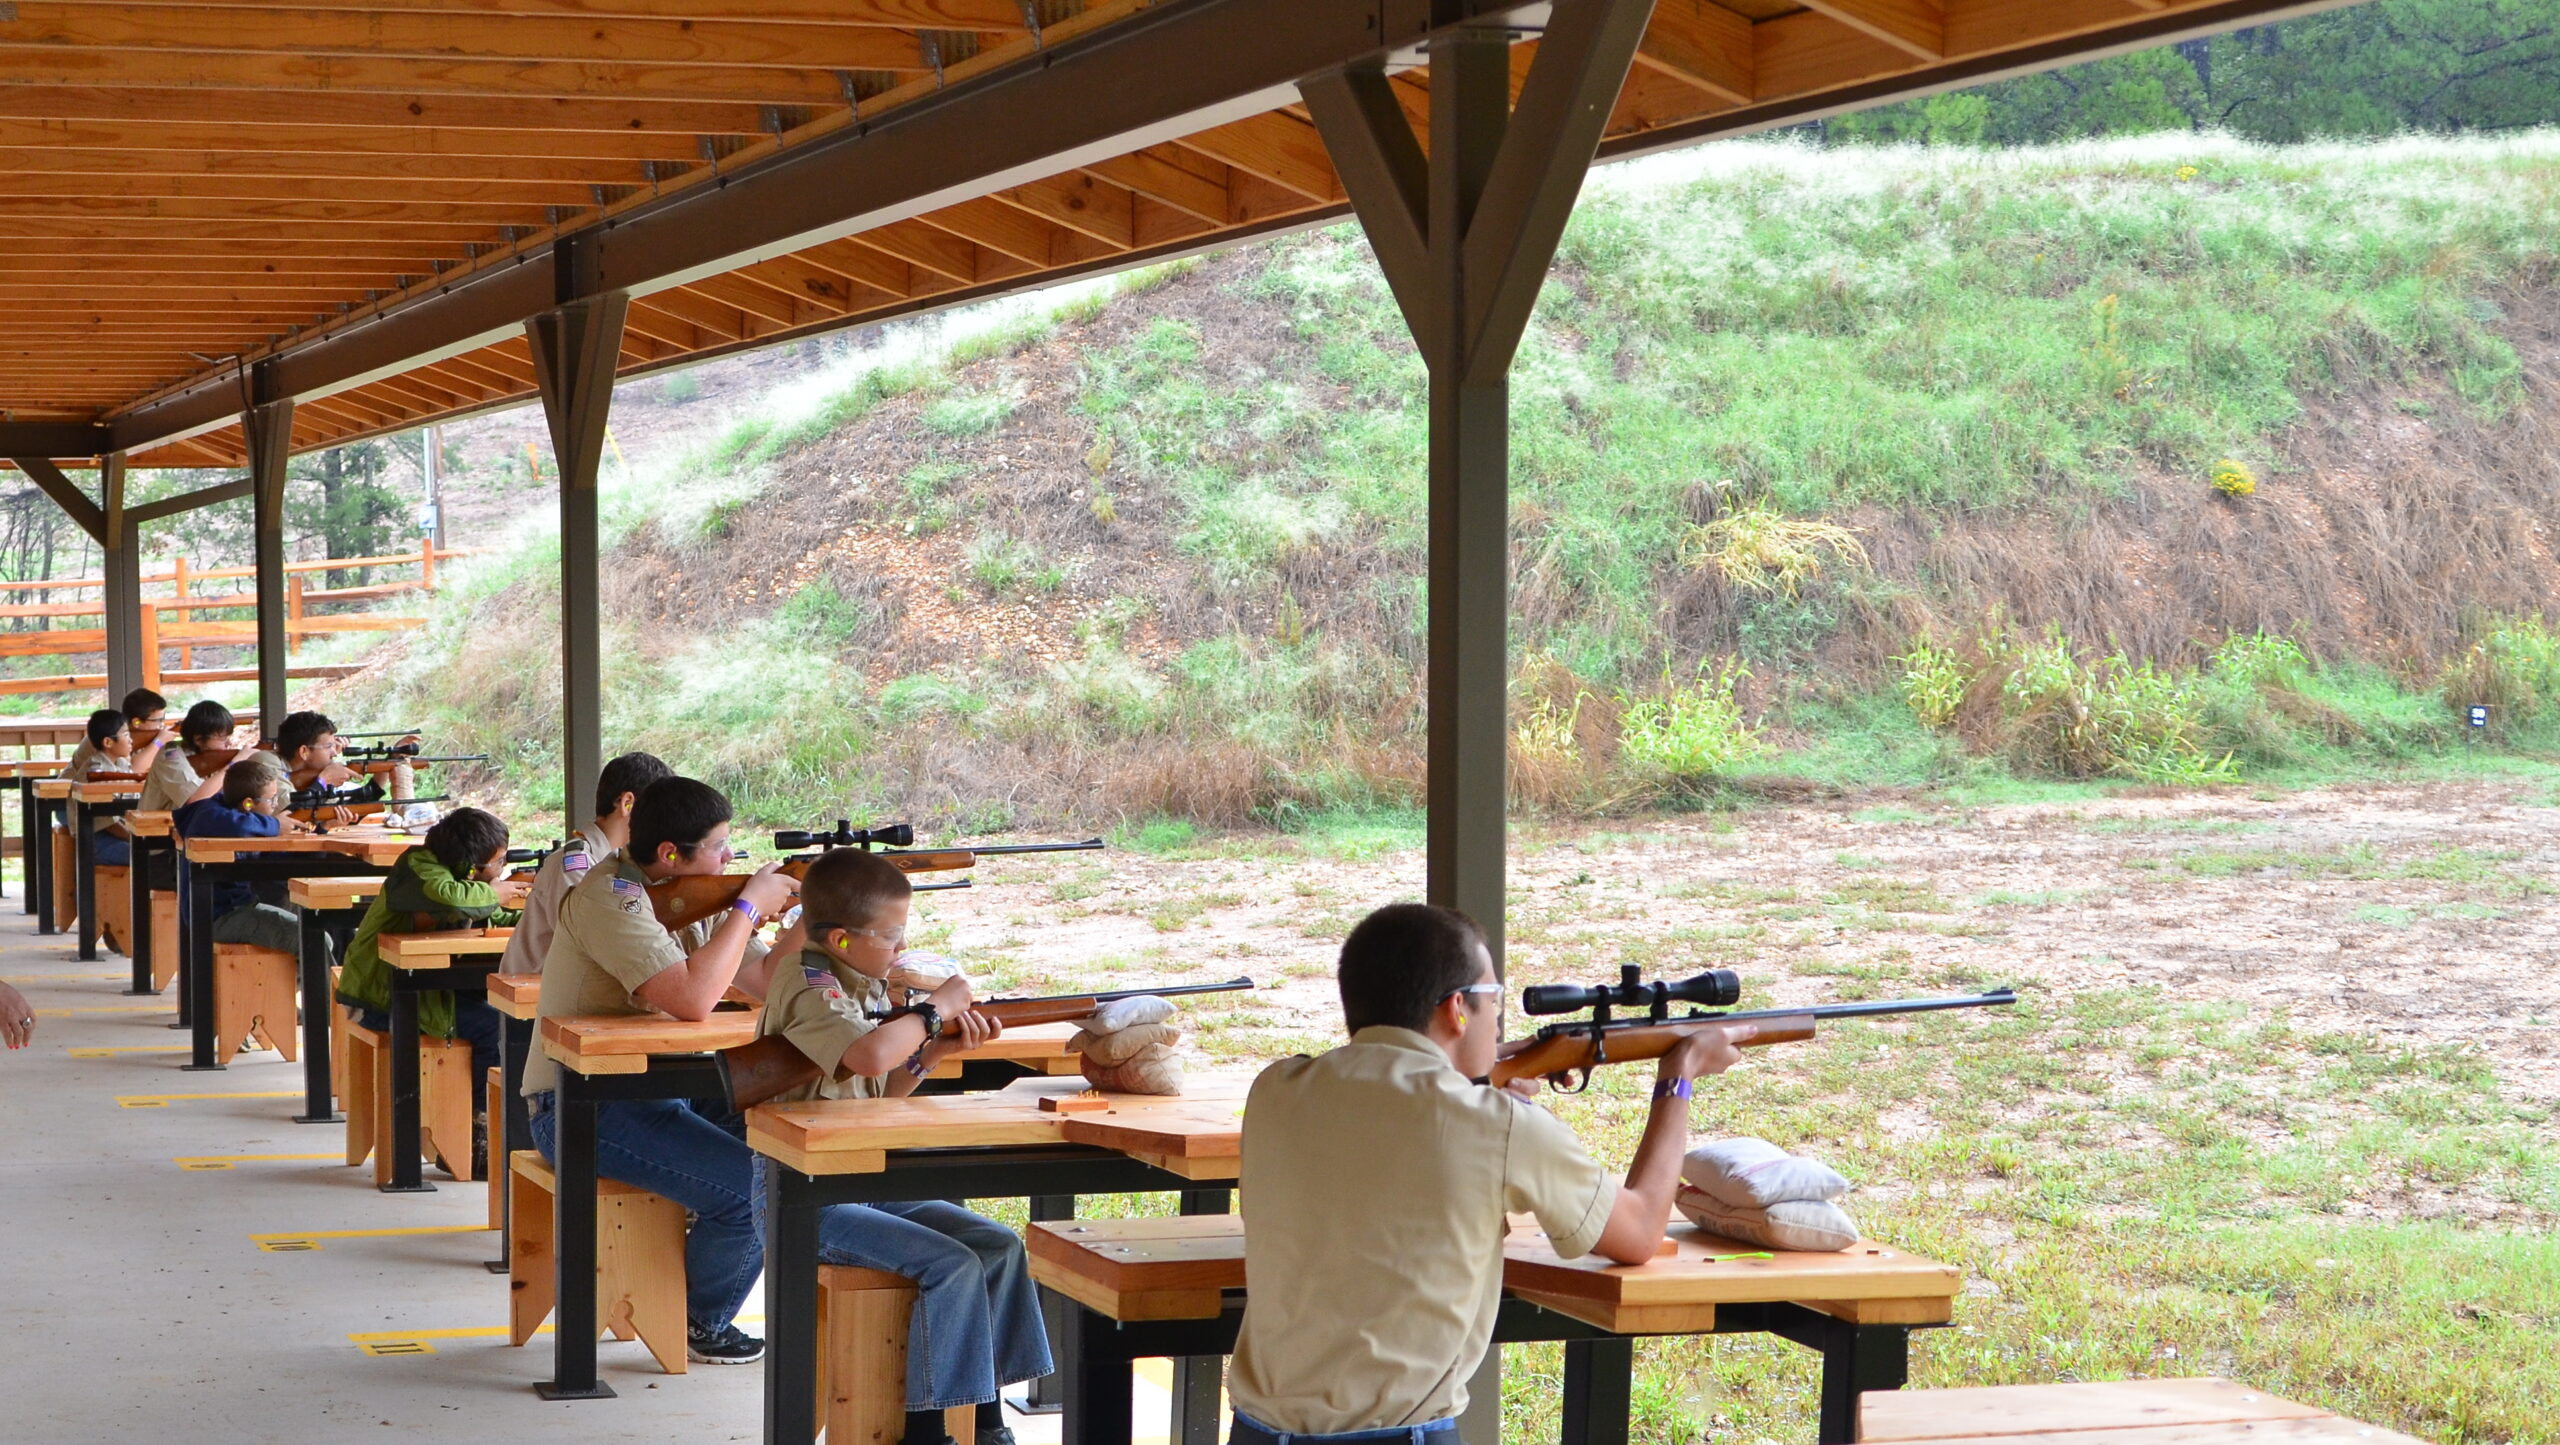 Upcoming Shooting Sports Campout